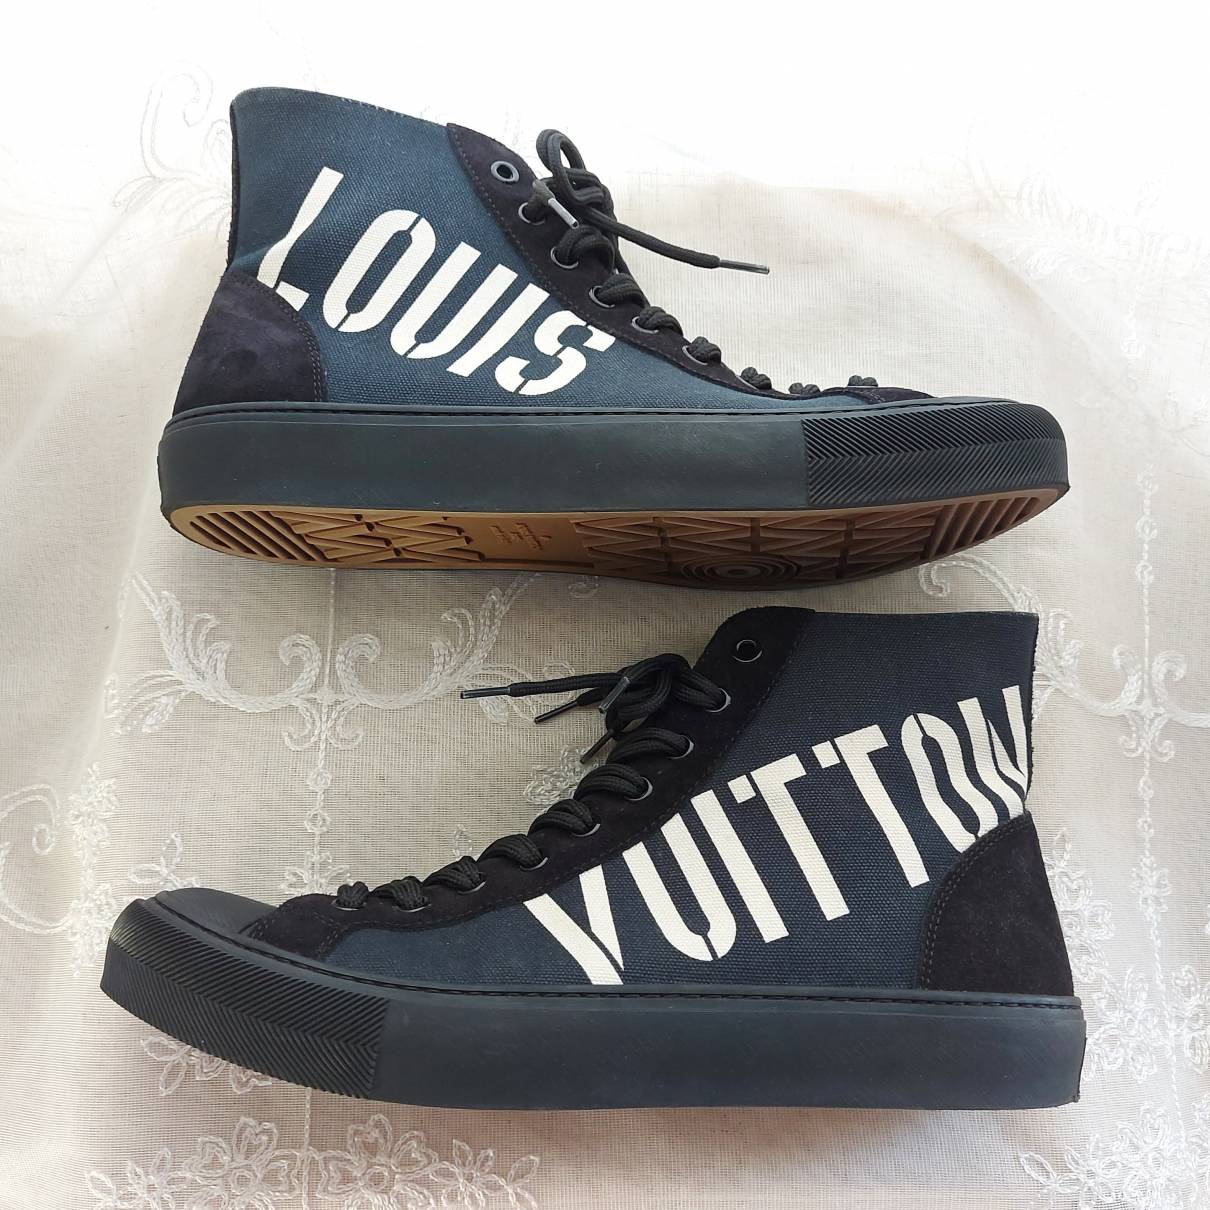 Louis Vuitton - Authenticated Tattoo Trainer - Cloth Black for Men, Very Good Condition